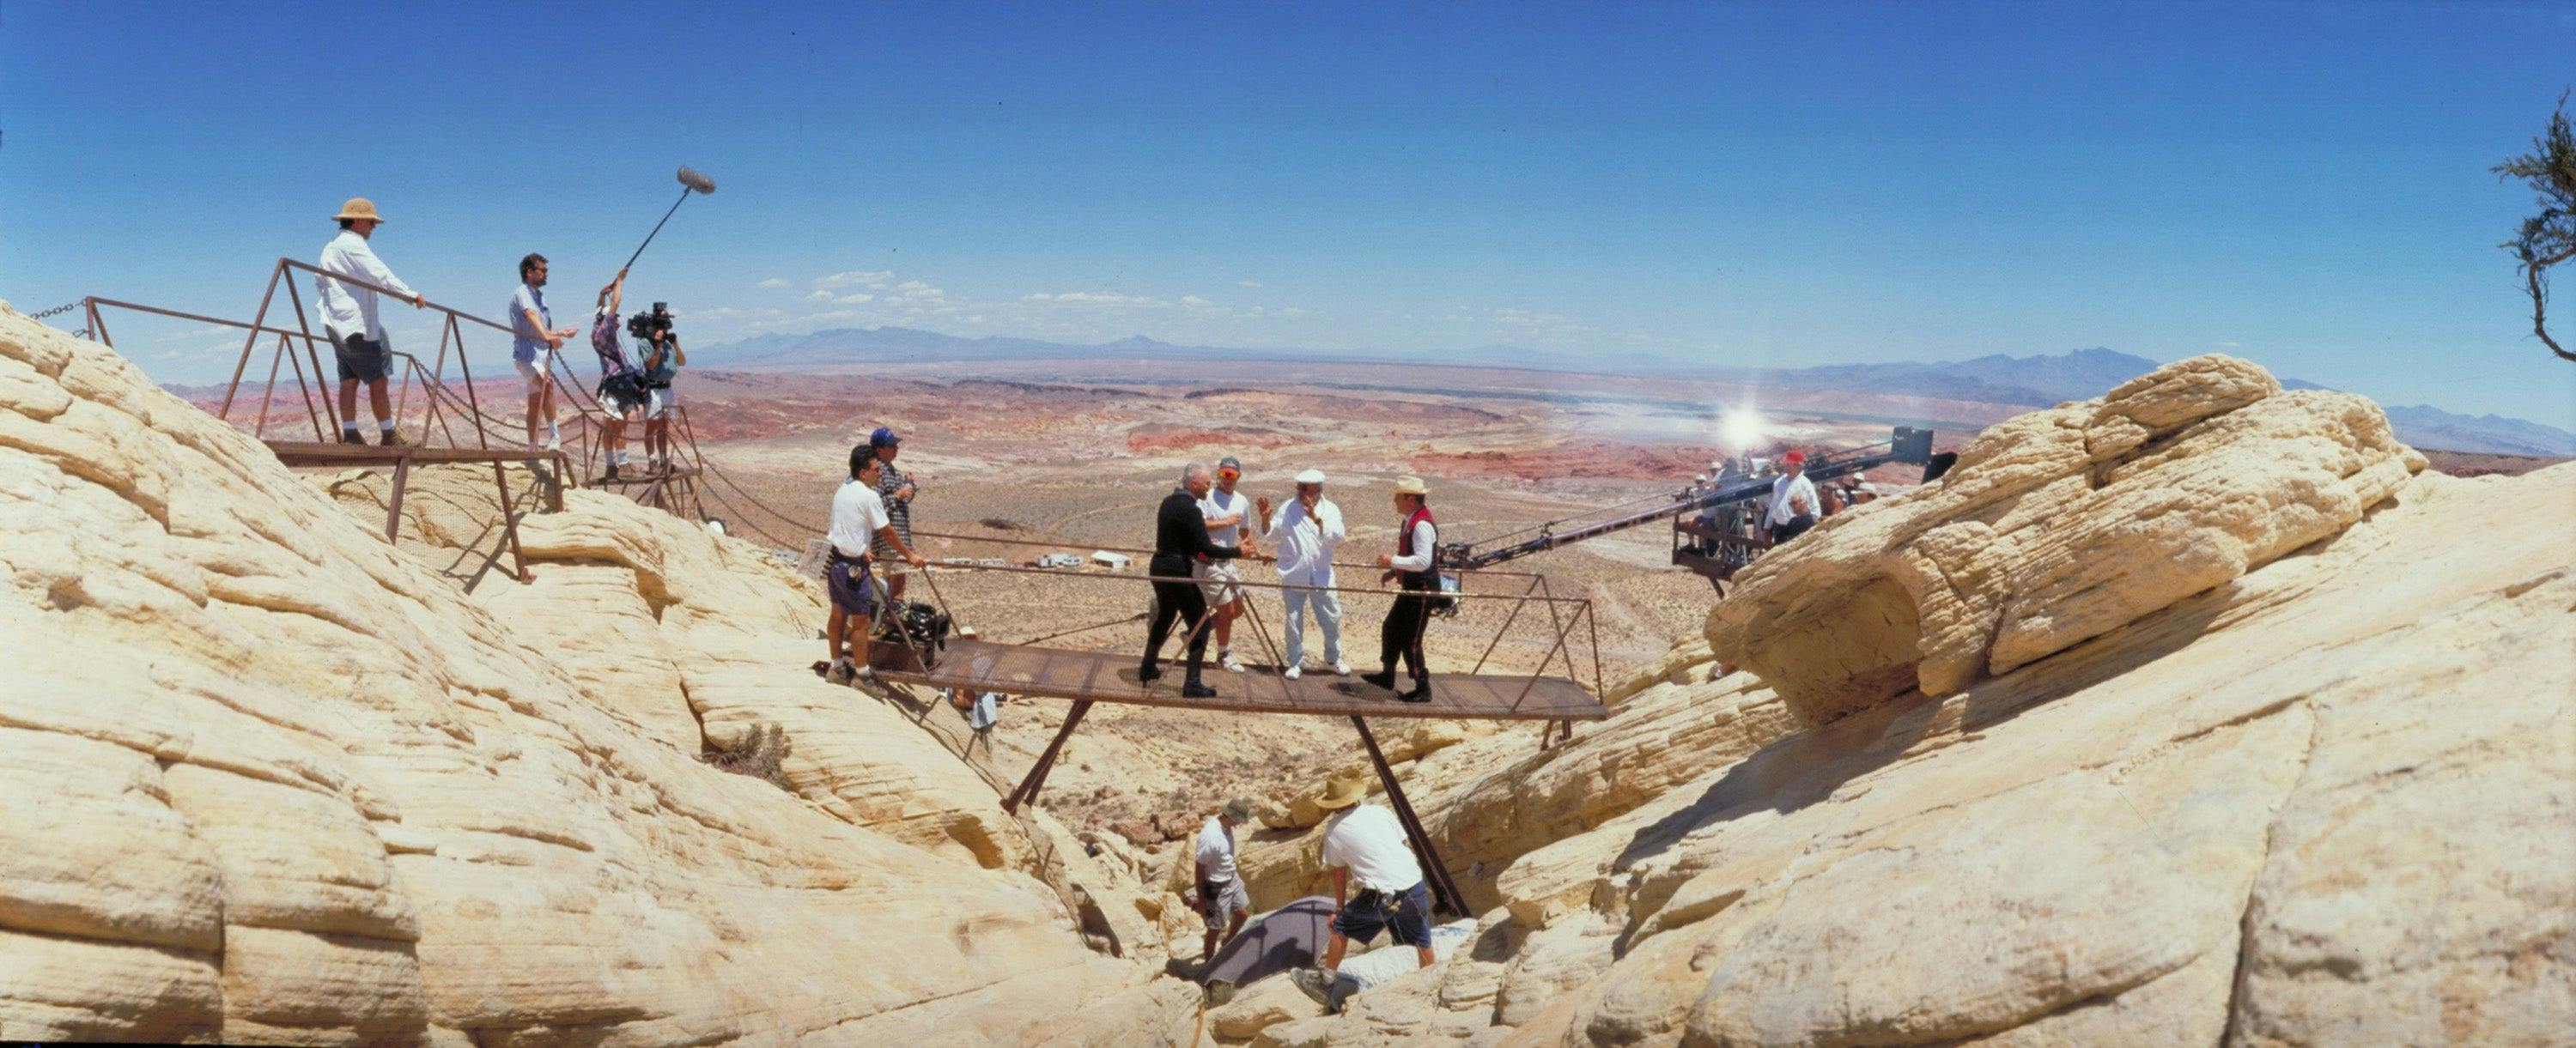 Wide shot of the fight scene featuring Macolm McDowell and William Shatner, various crew and gear, on the set of Star Trek Generations